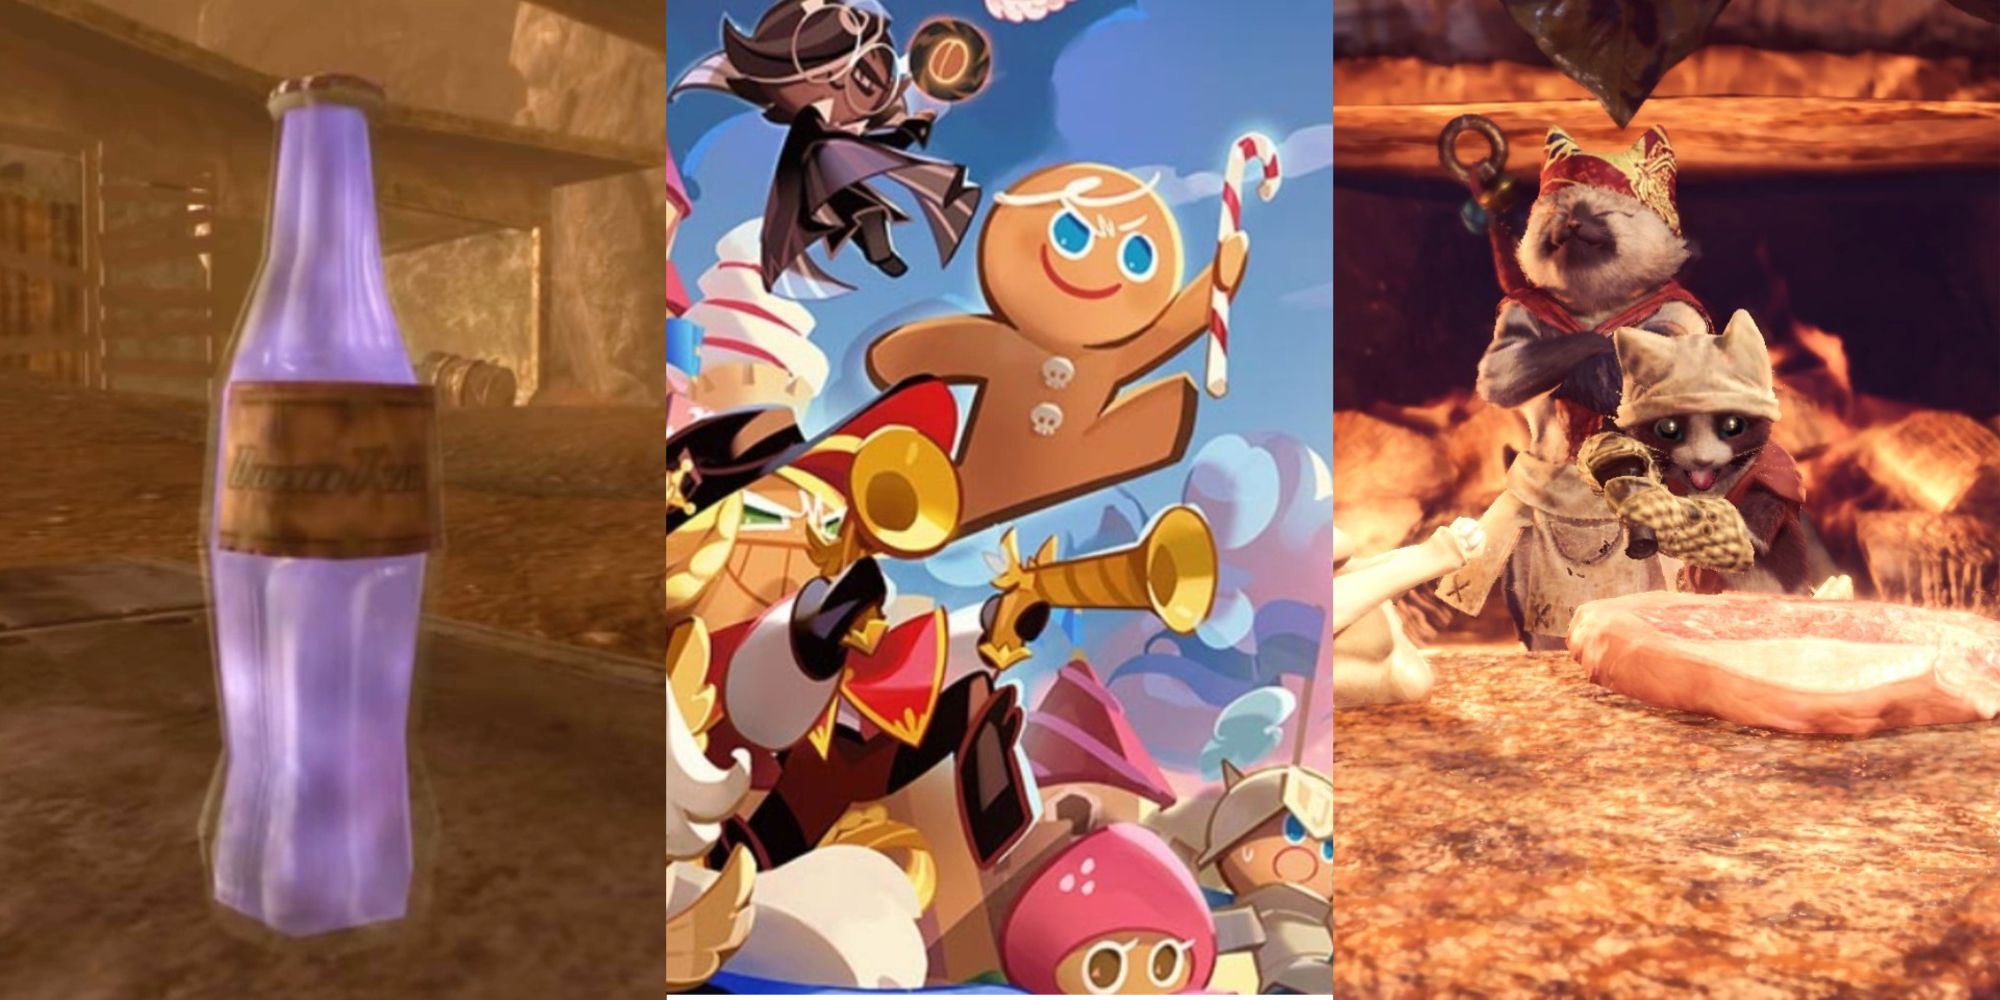 Nuka-Cola Fallout left, Cookie Run Kingdom Middle, Monster Hunter World Right